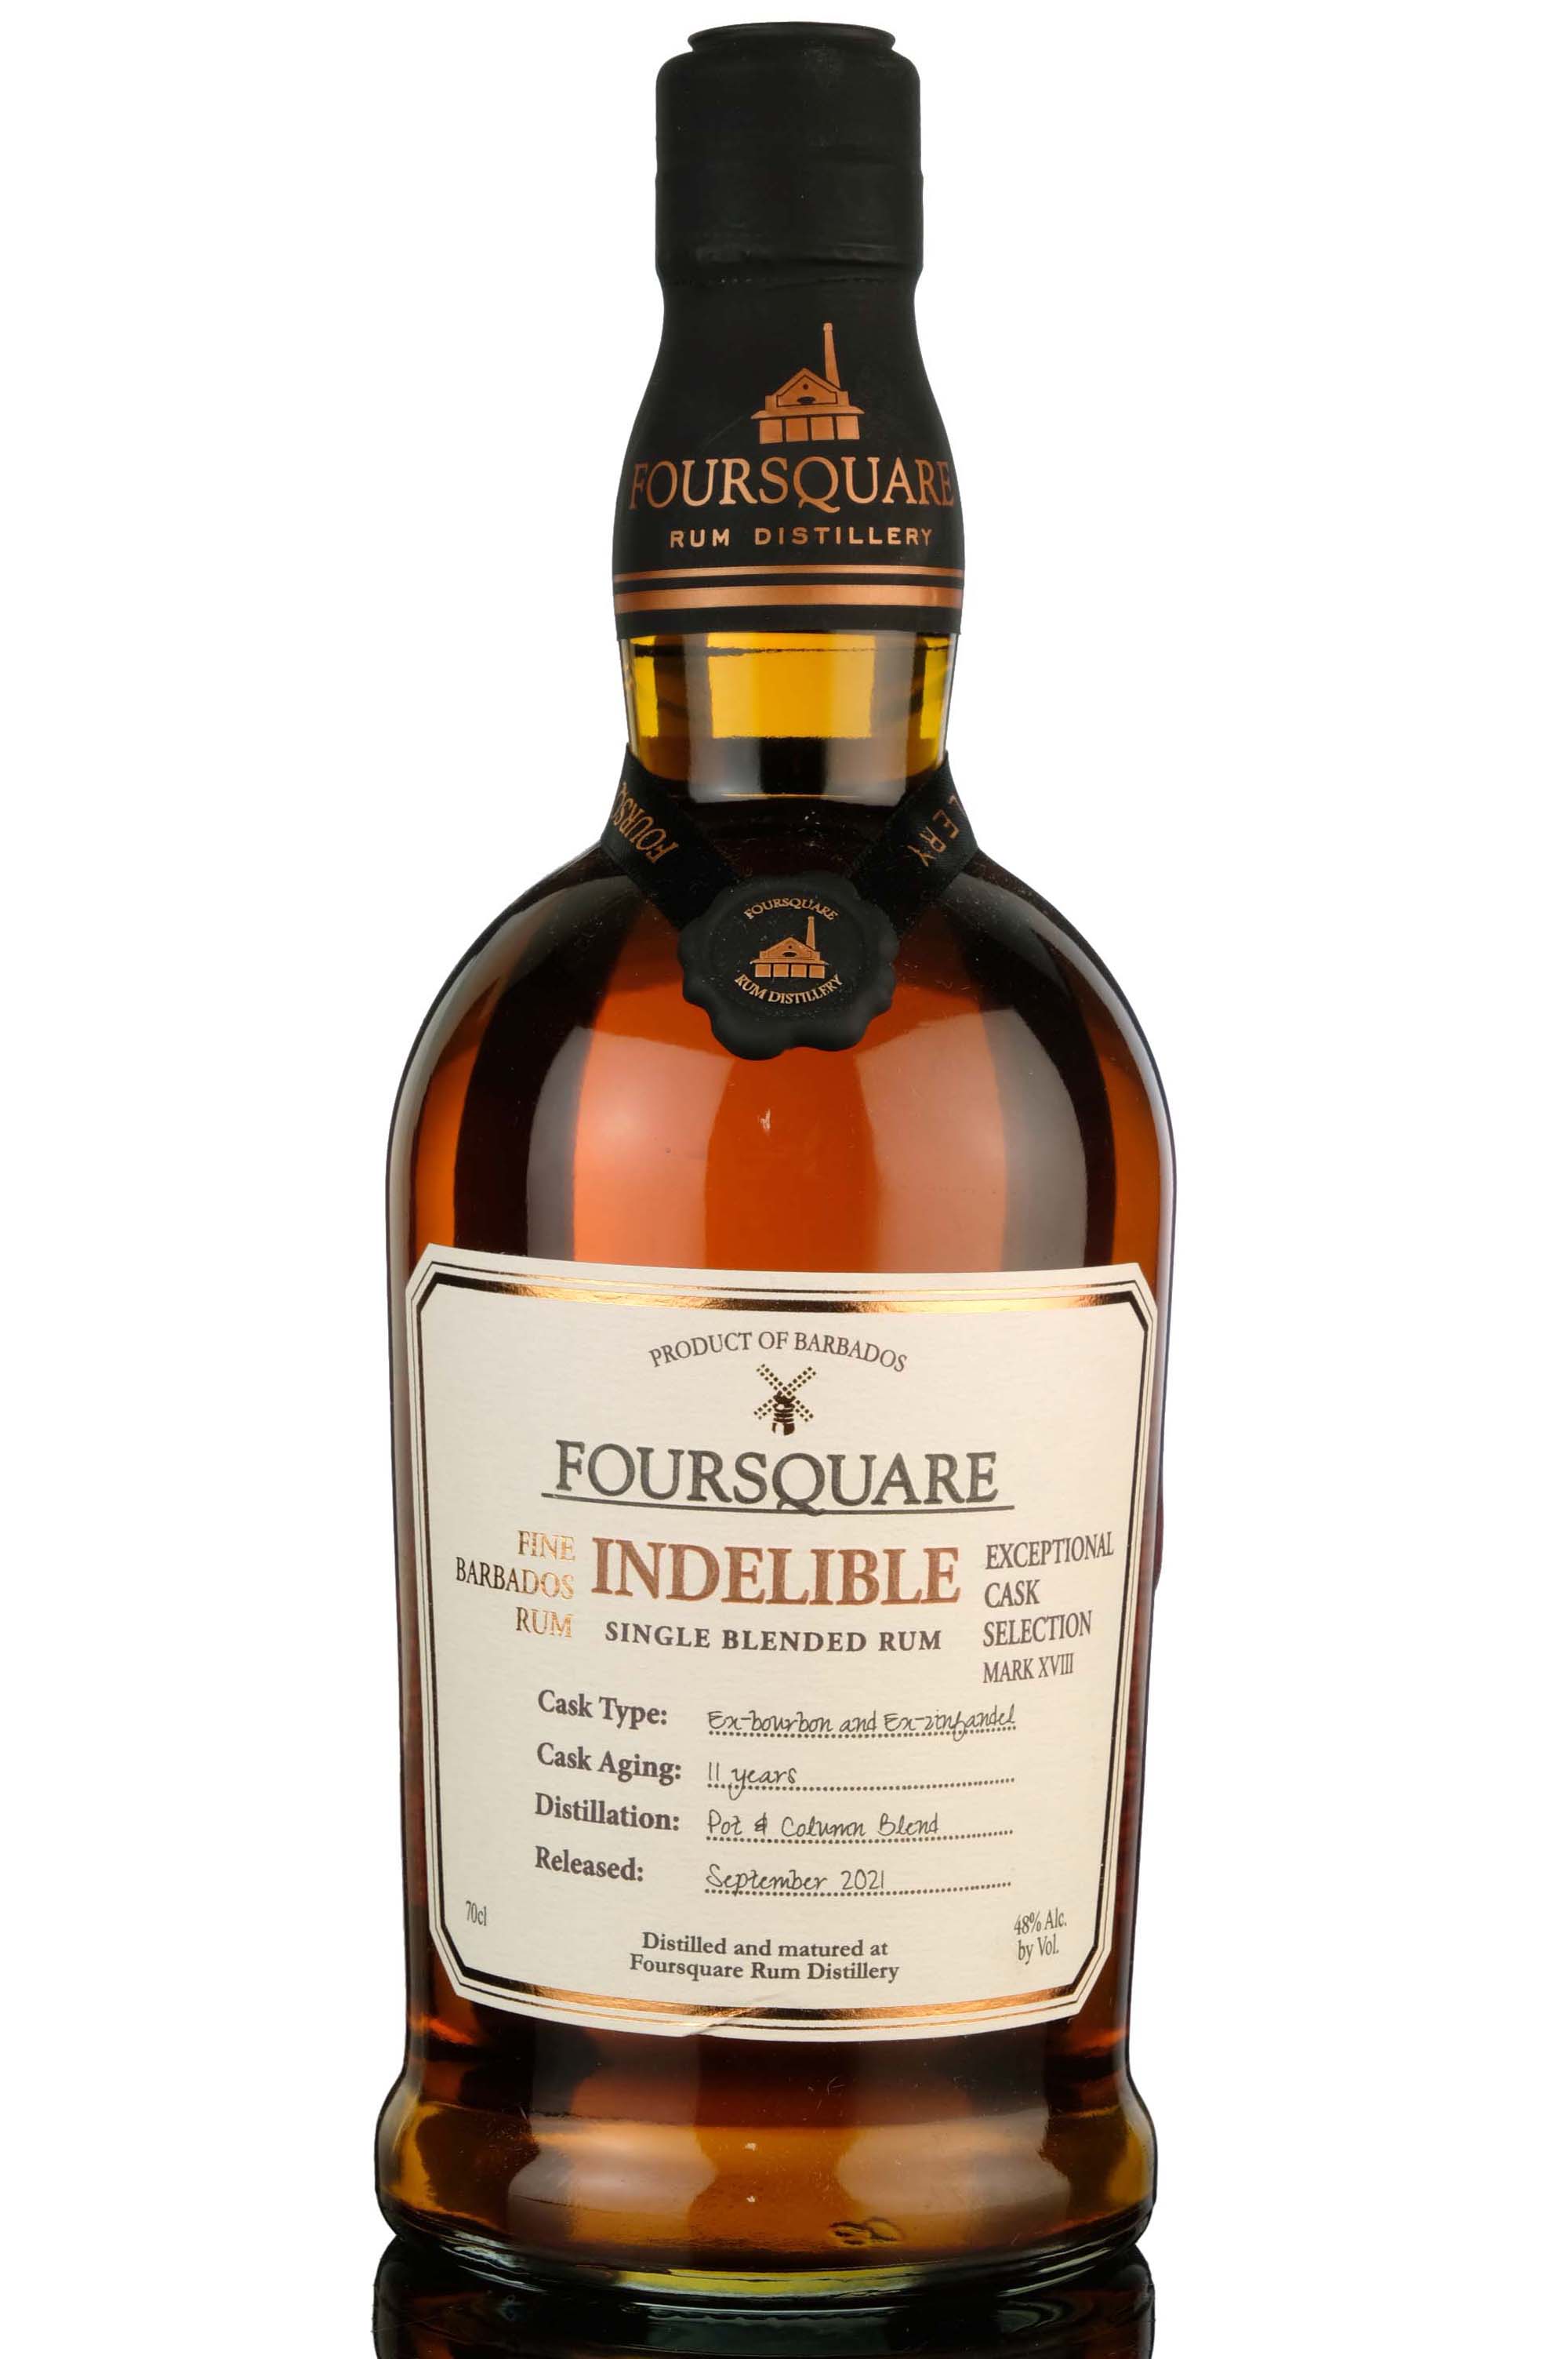 Foursquare 11 Year Old - Exceptional Cask Selection - Indelible - 2021 Release